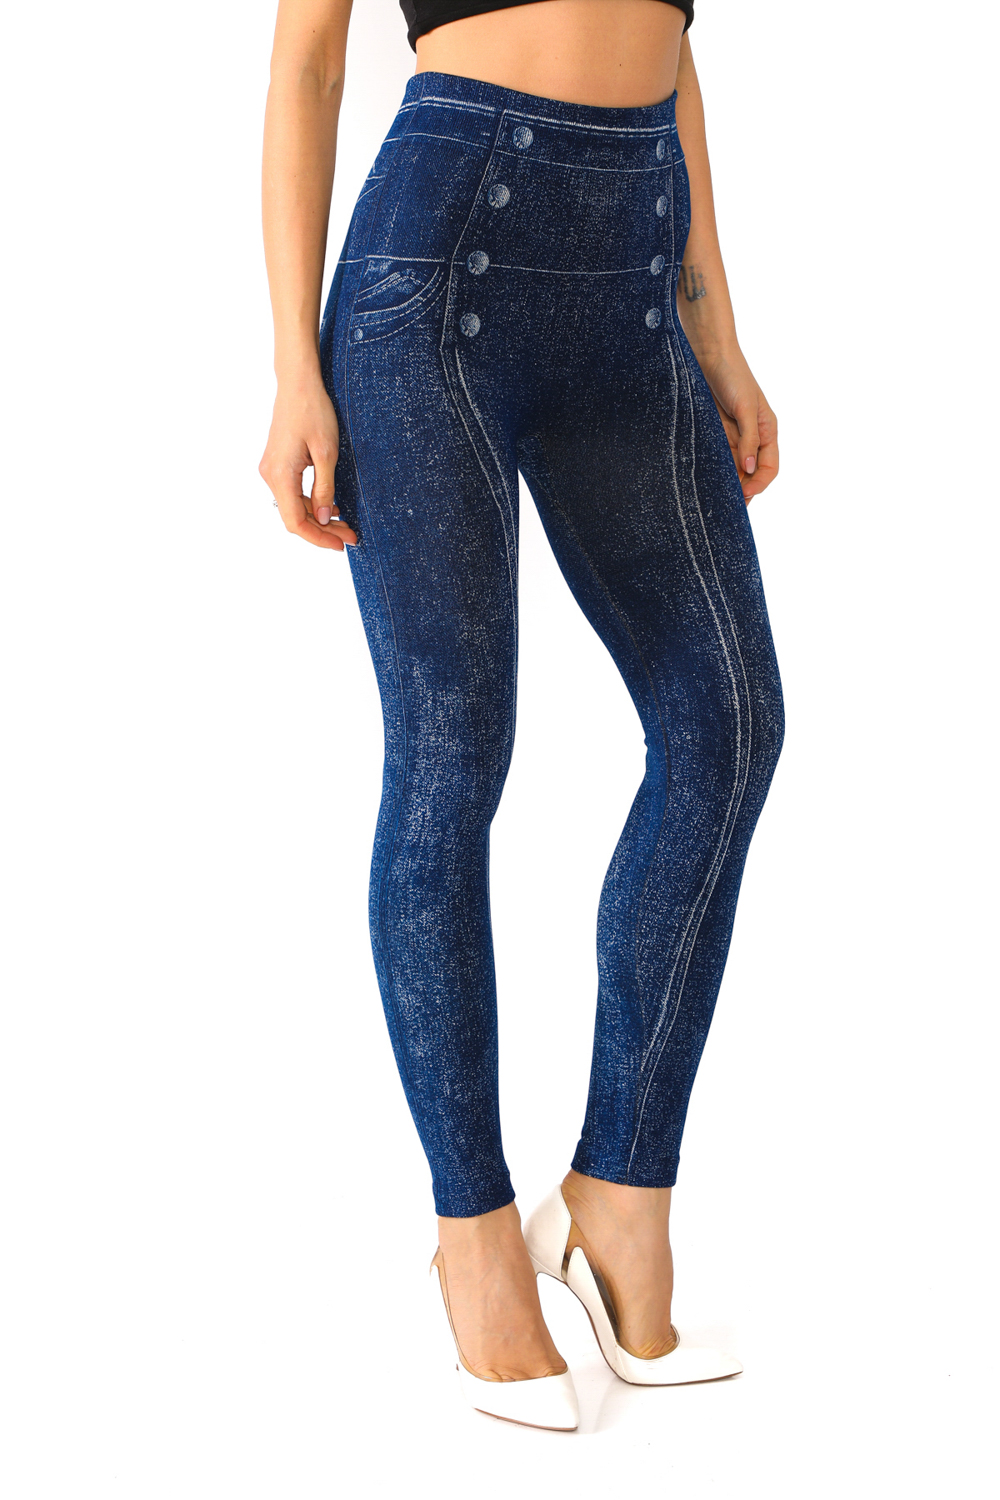 Denim Leggings with Side Button and Stripe Pattern